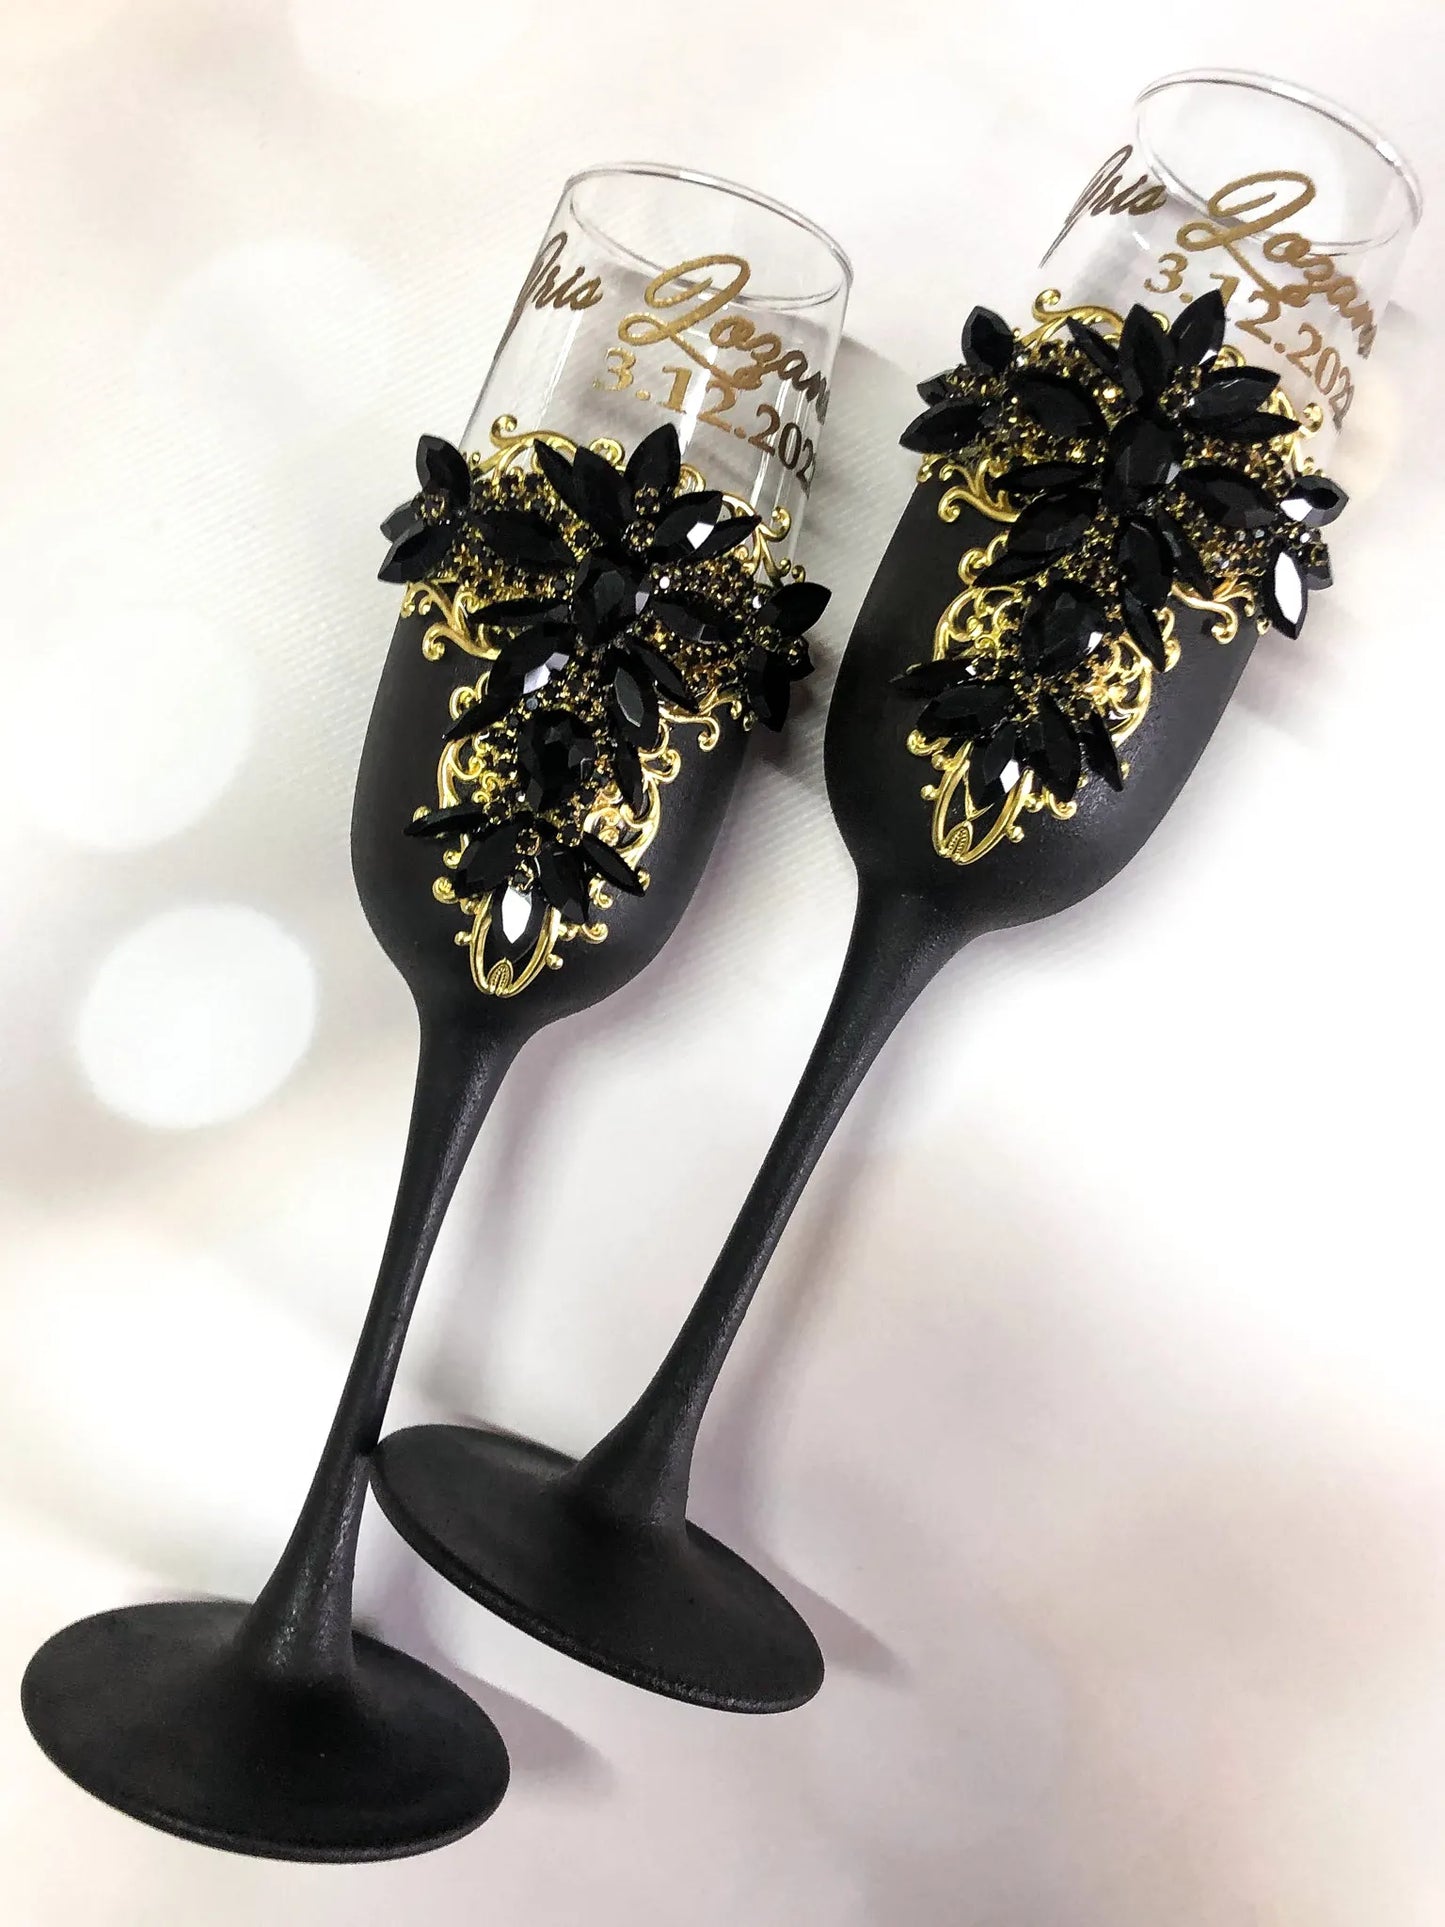 Enchanting Gothic Black and Gold Engraved Champagne Flutes